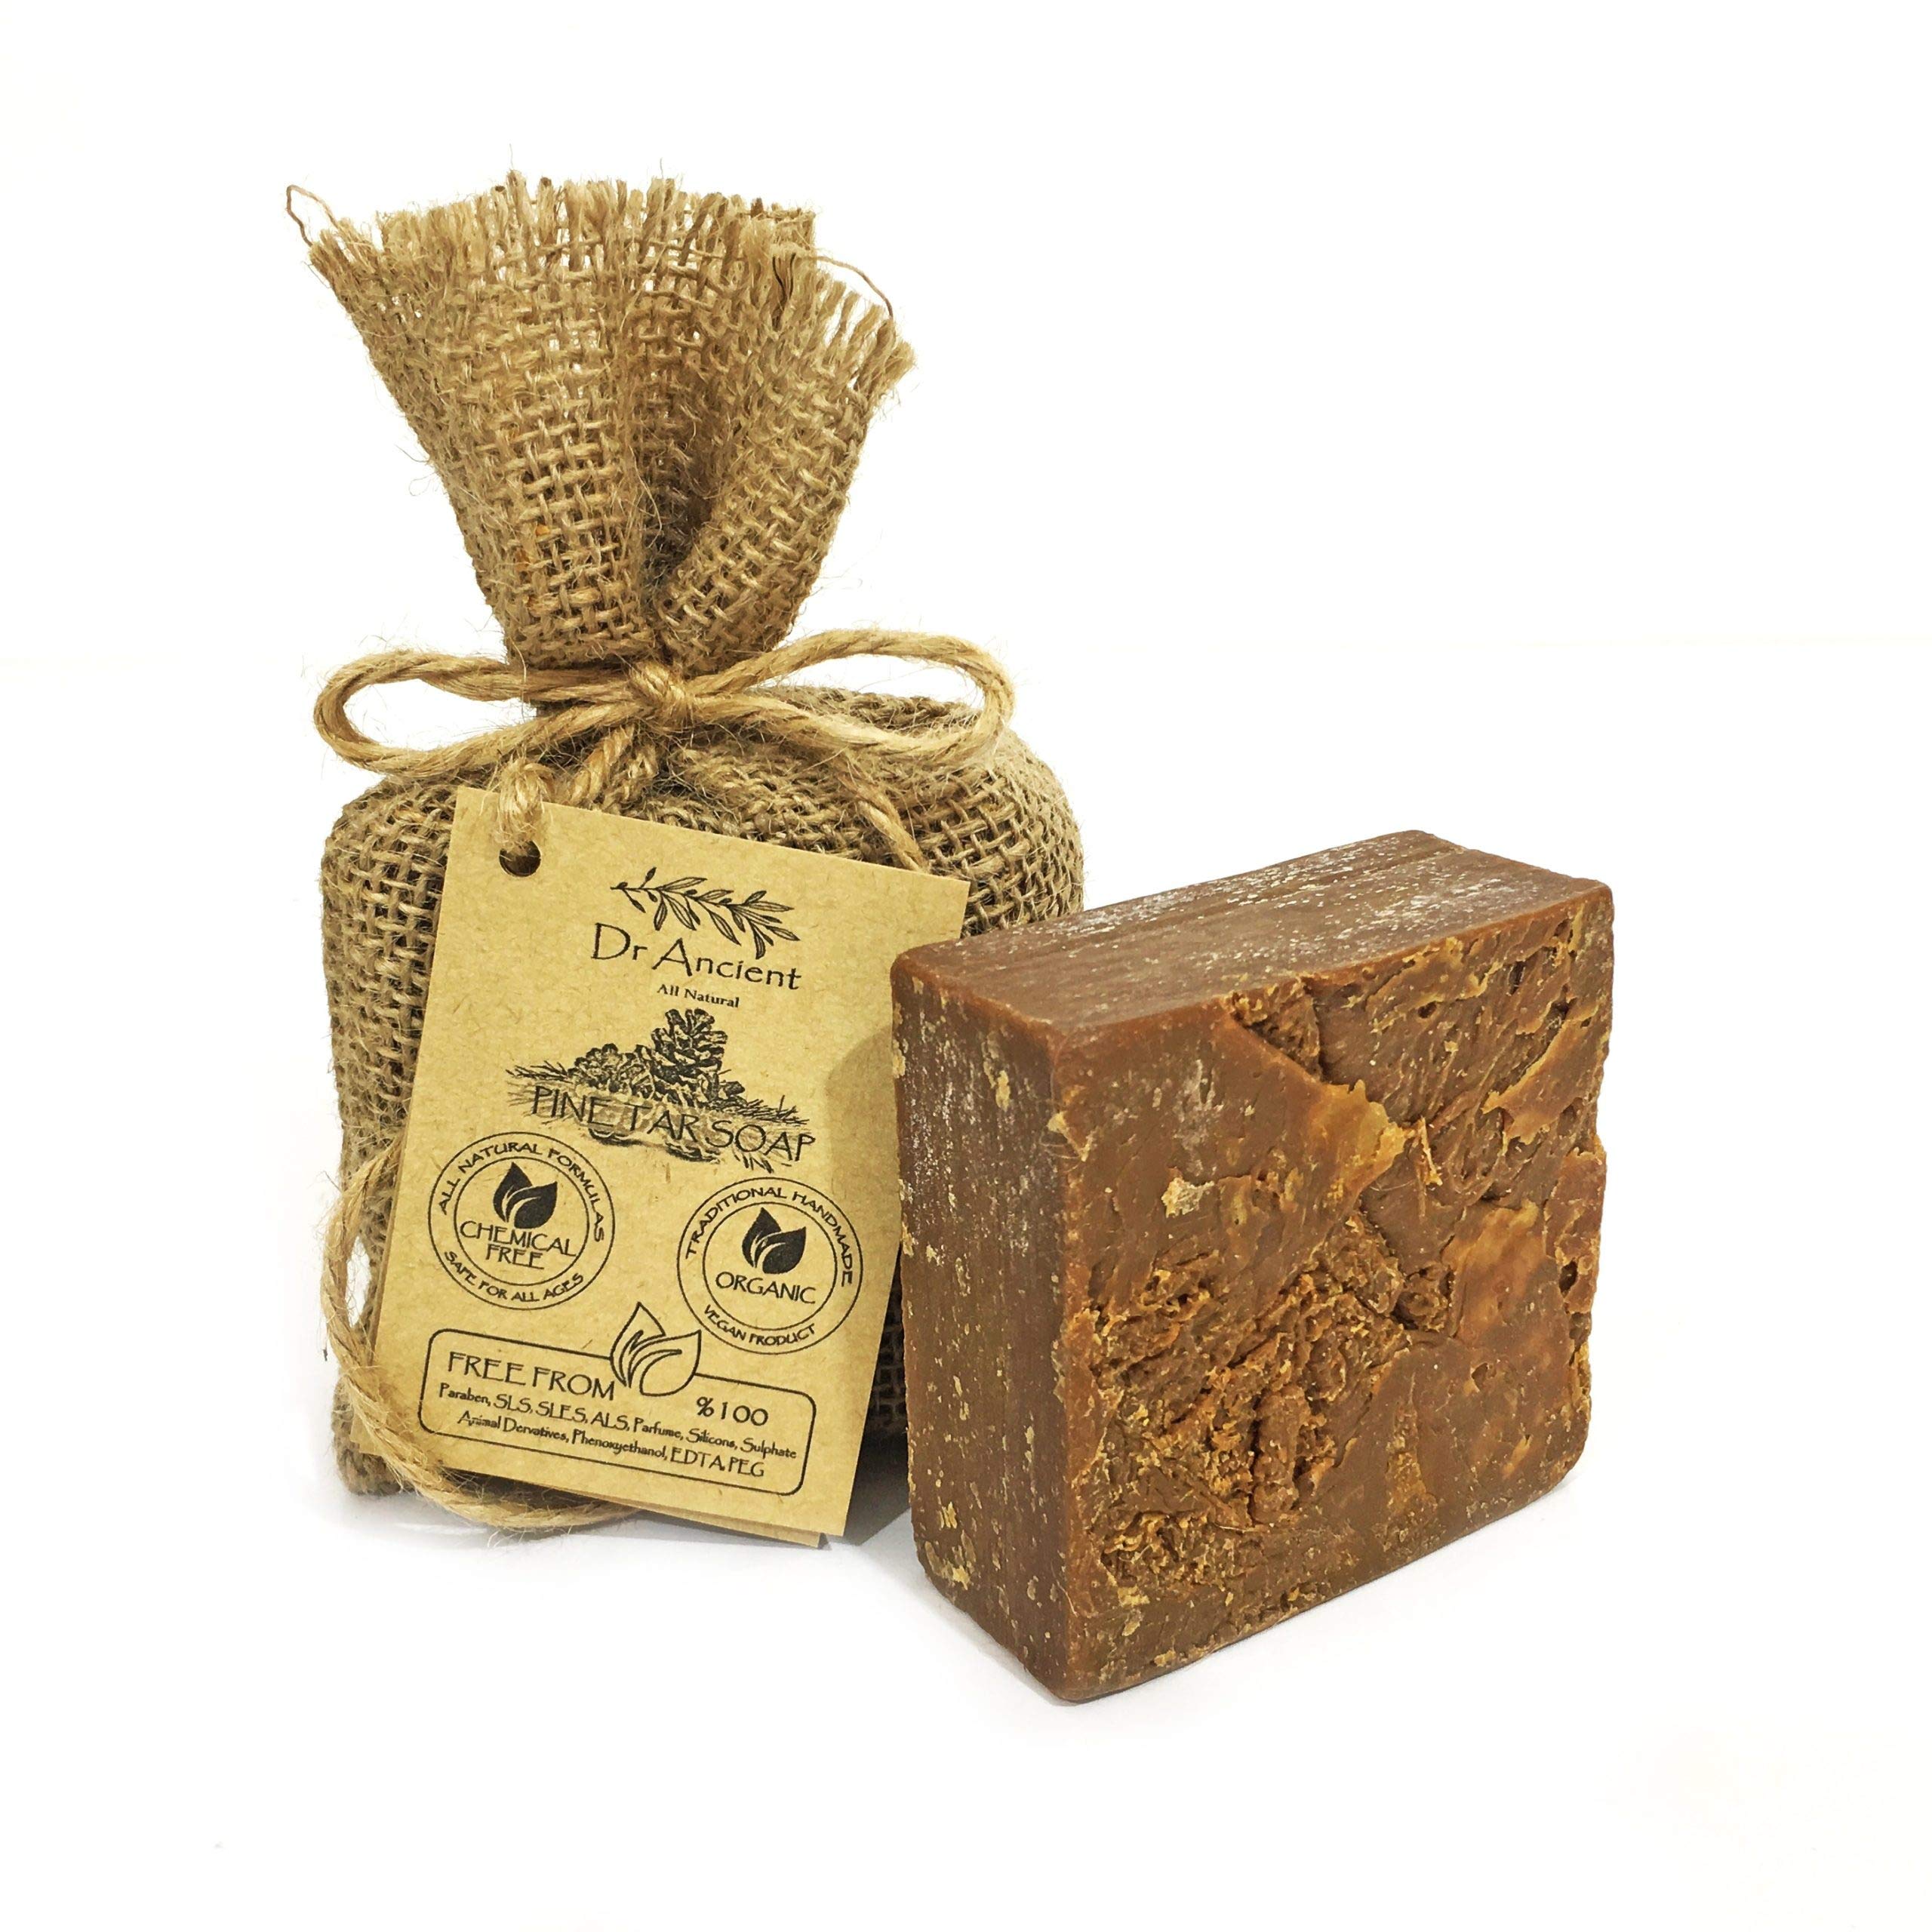 Black Soap Bar With Pine Tar Organic Natural Vegan Traditional Handmade Antique - Antibacterial, Anti-Fungal, Acne, Eczema, Itchy Skin And Cellulite - No Chemicals, Pure Natural Soaps!